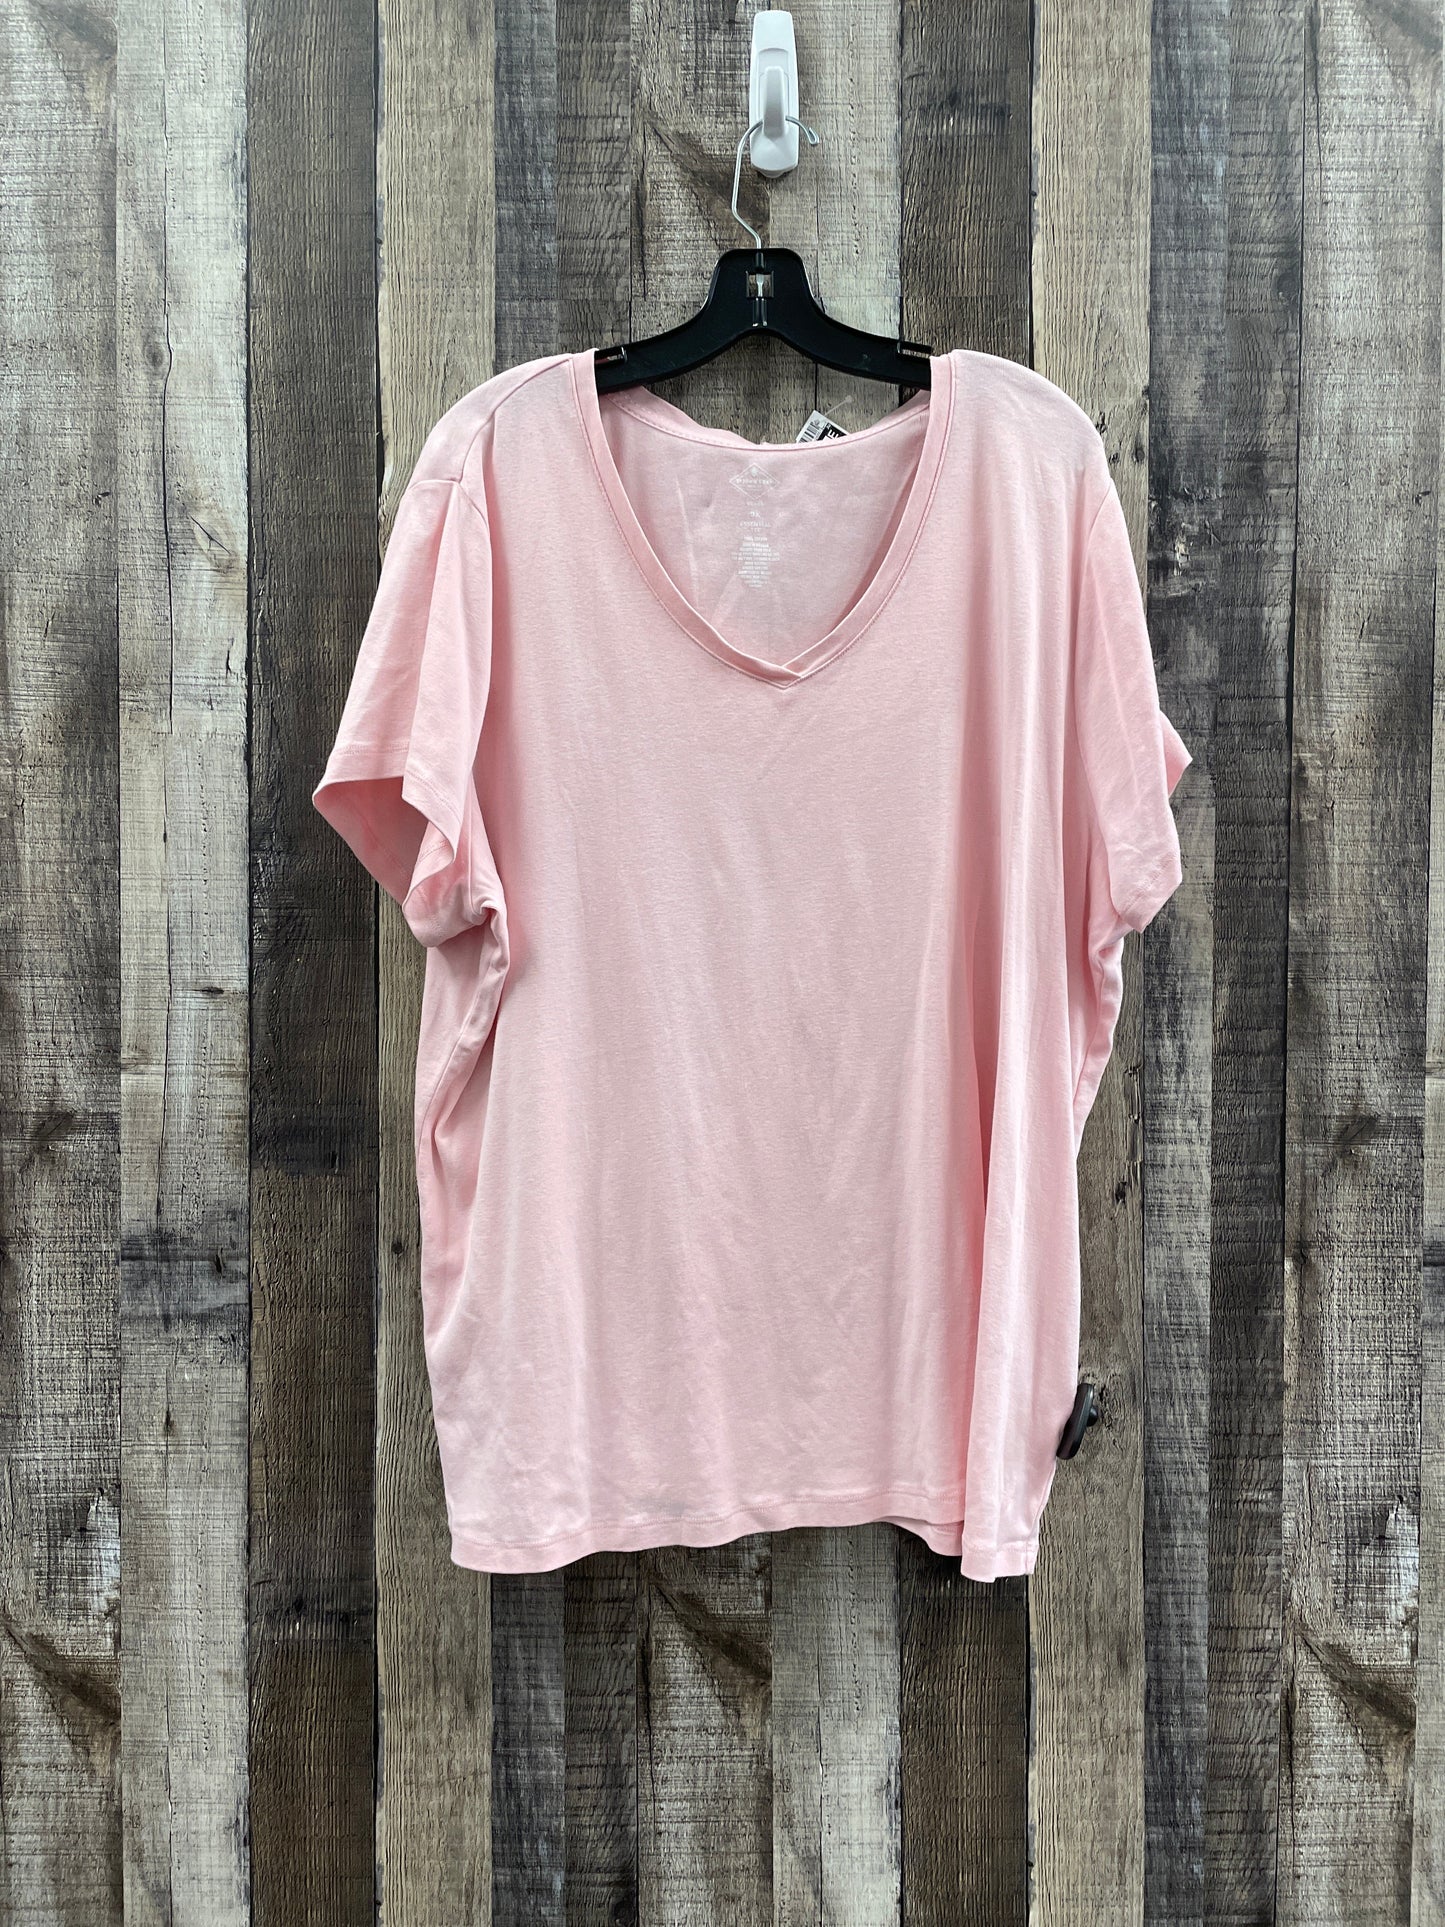 Pink Top Short Sleeve St Johns Bay, Size 3x